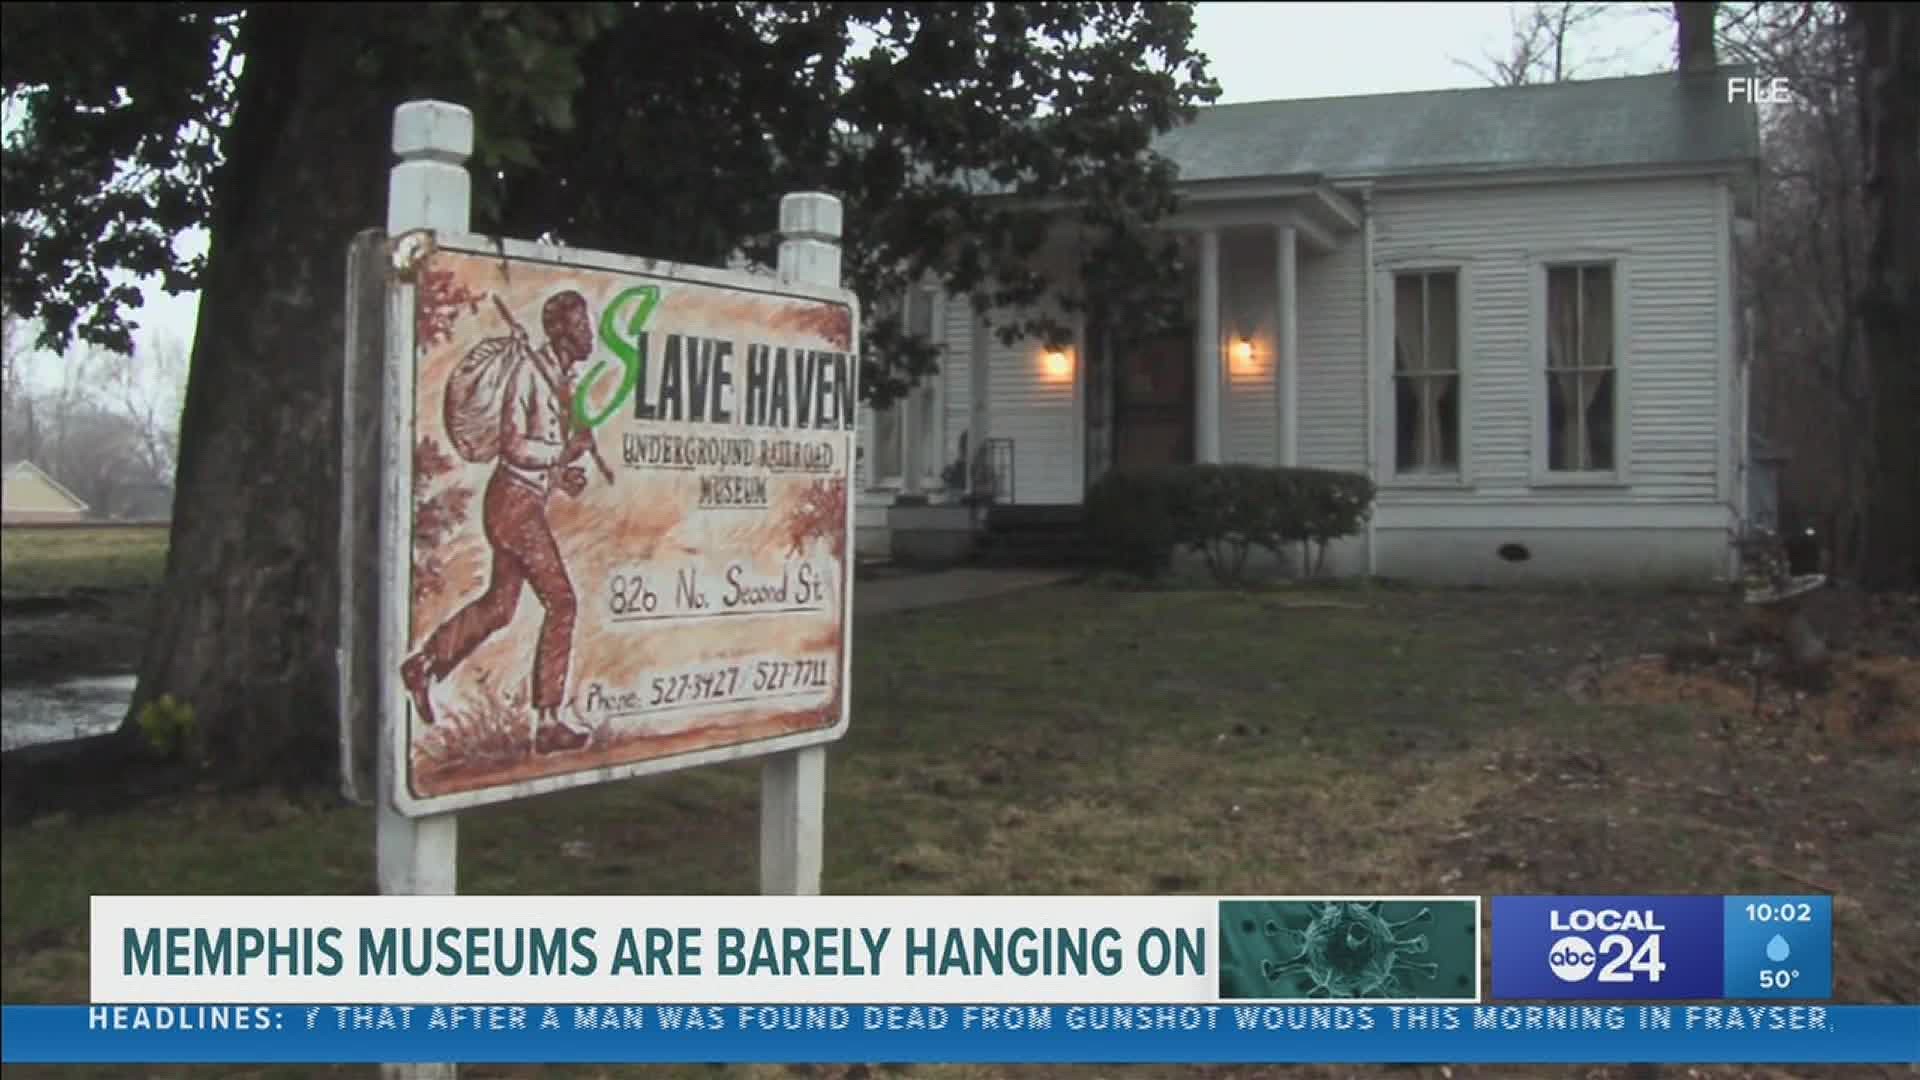 Memphis museums, some small businesses are closing temporarily under COVID-19 pressures.